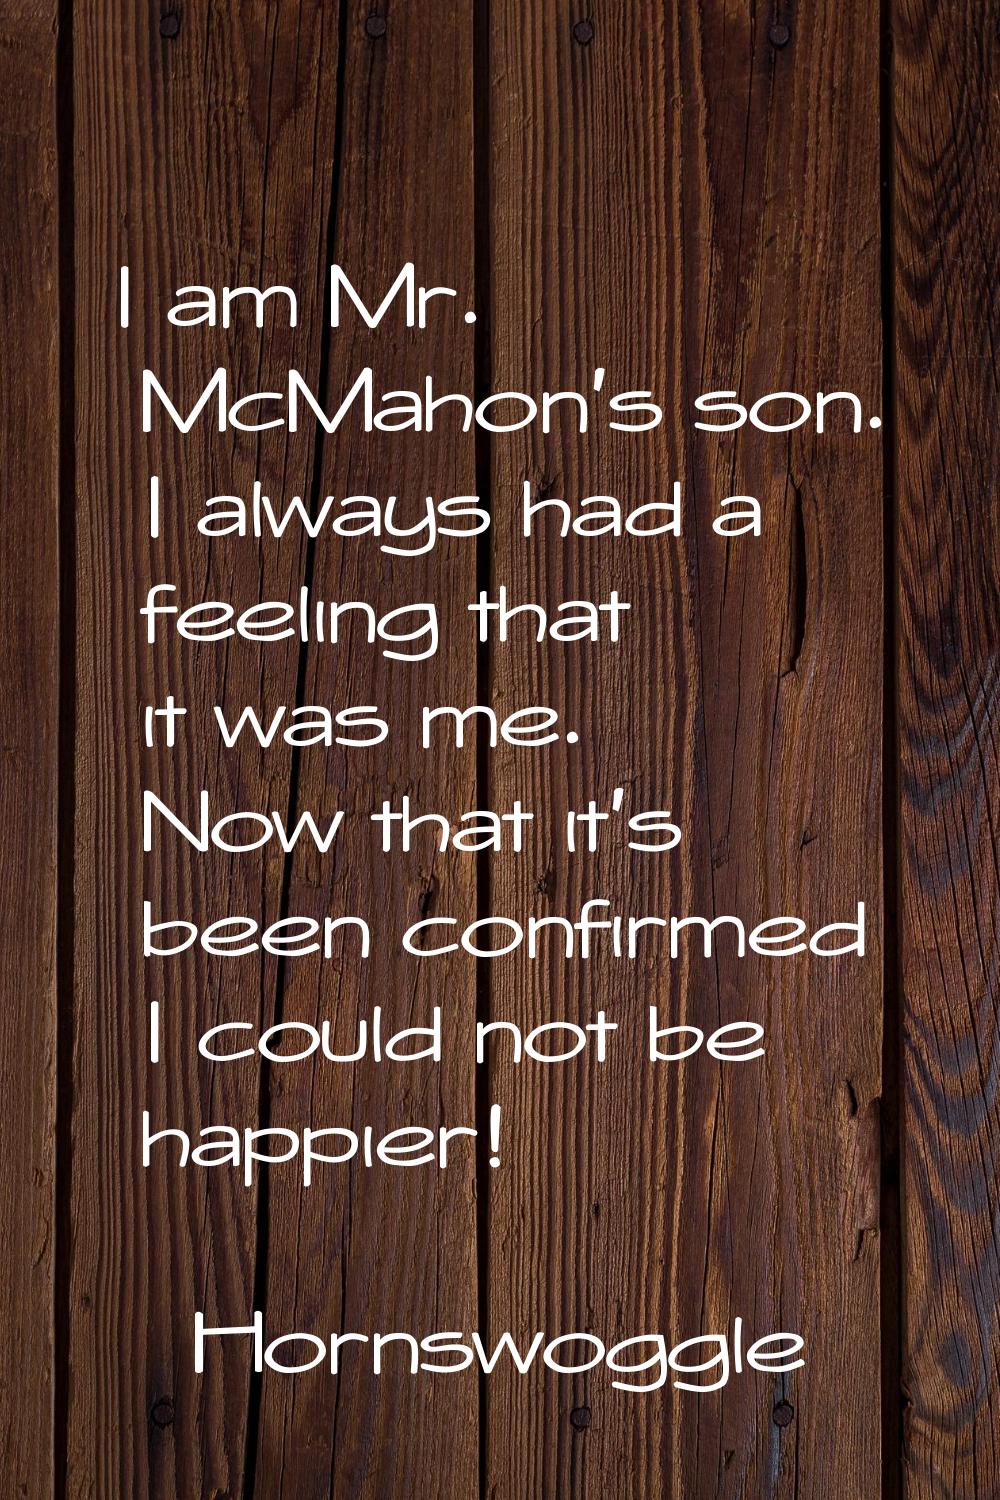 I am Mr. McMahon's son. I always had a feeling that it was me. Now that it's been confirmed I could